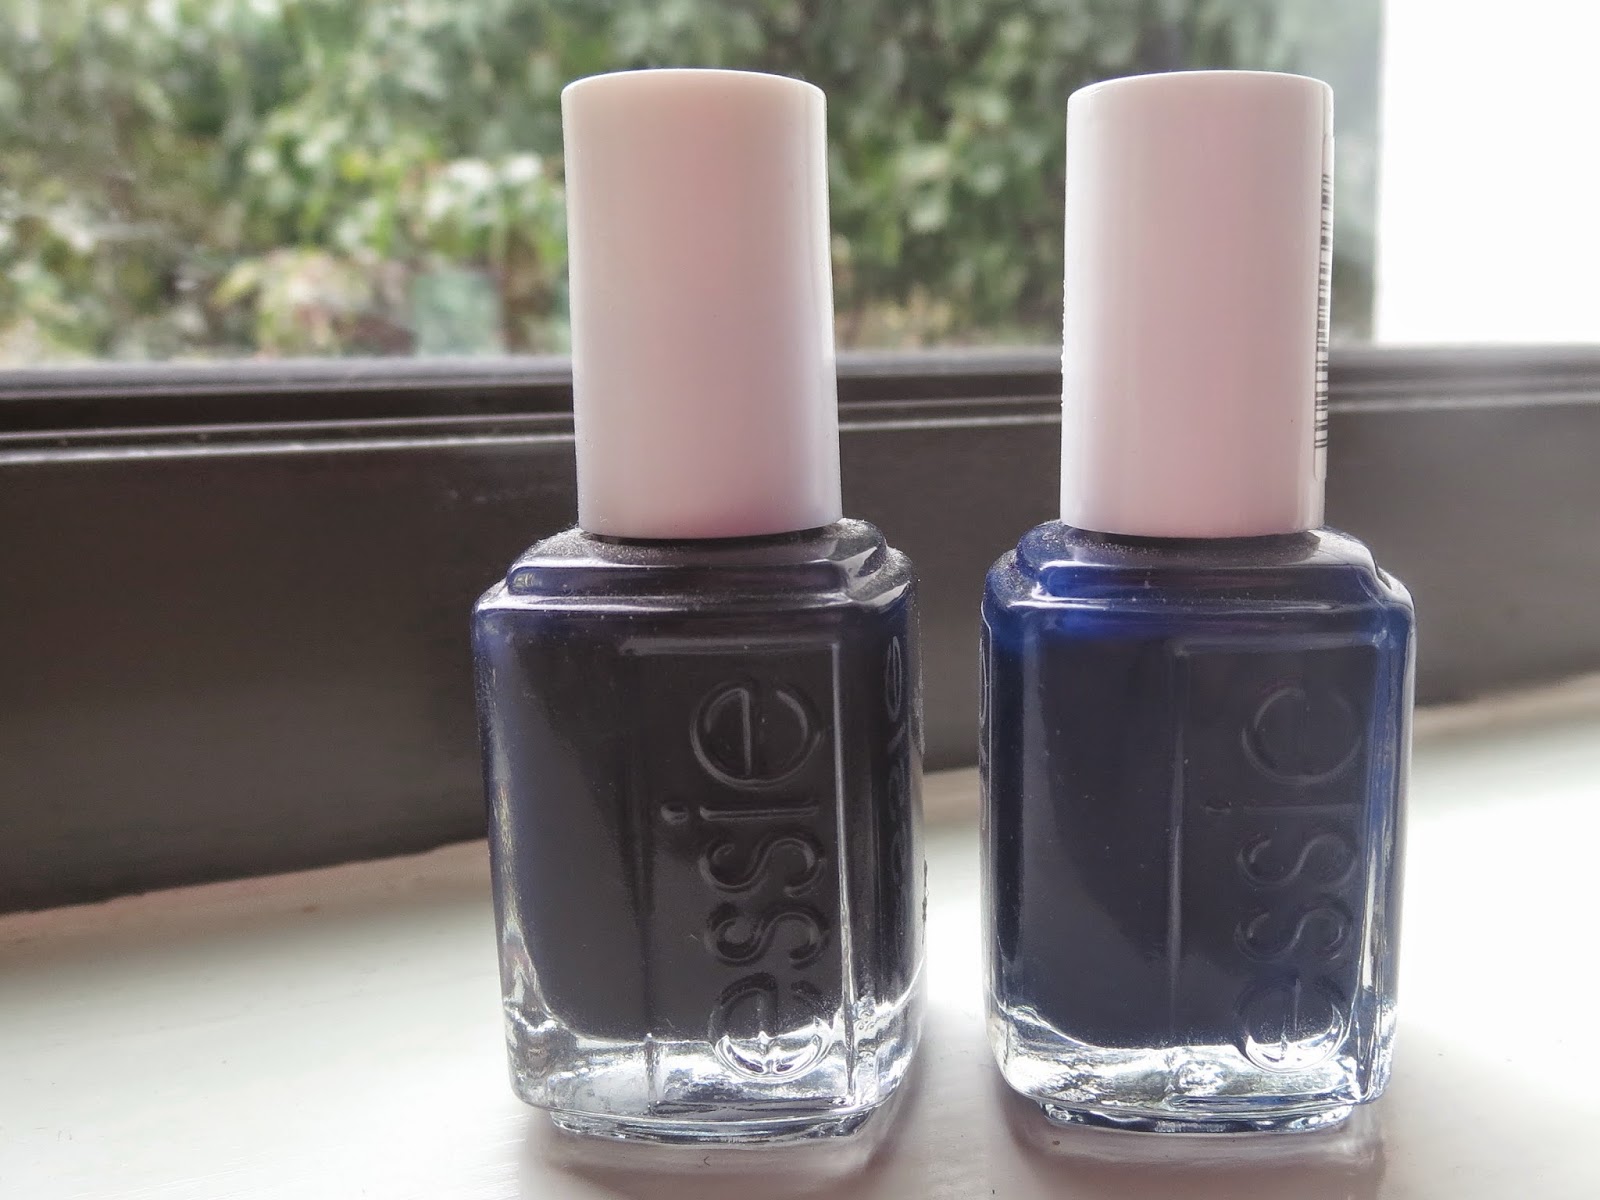 a picture of Essie's After School Boy Blazer and Style Cartel nail polishes